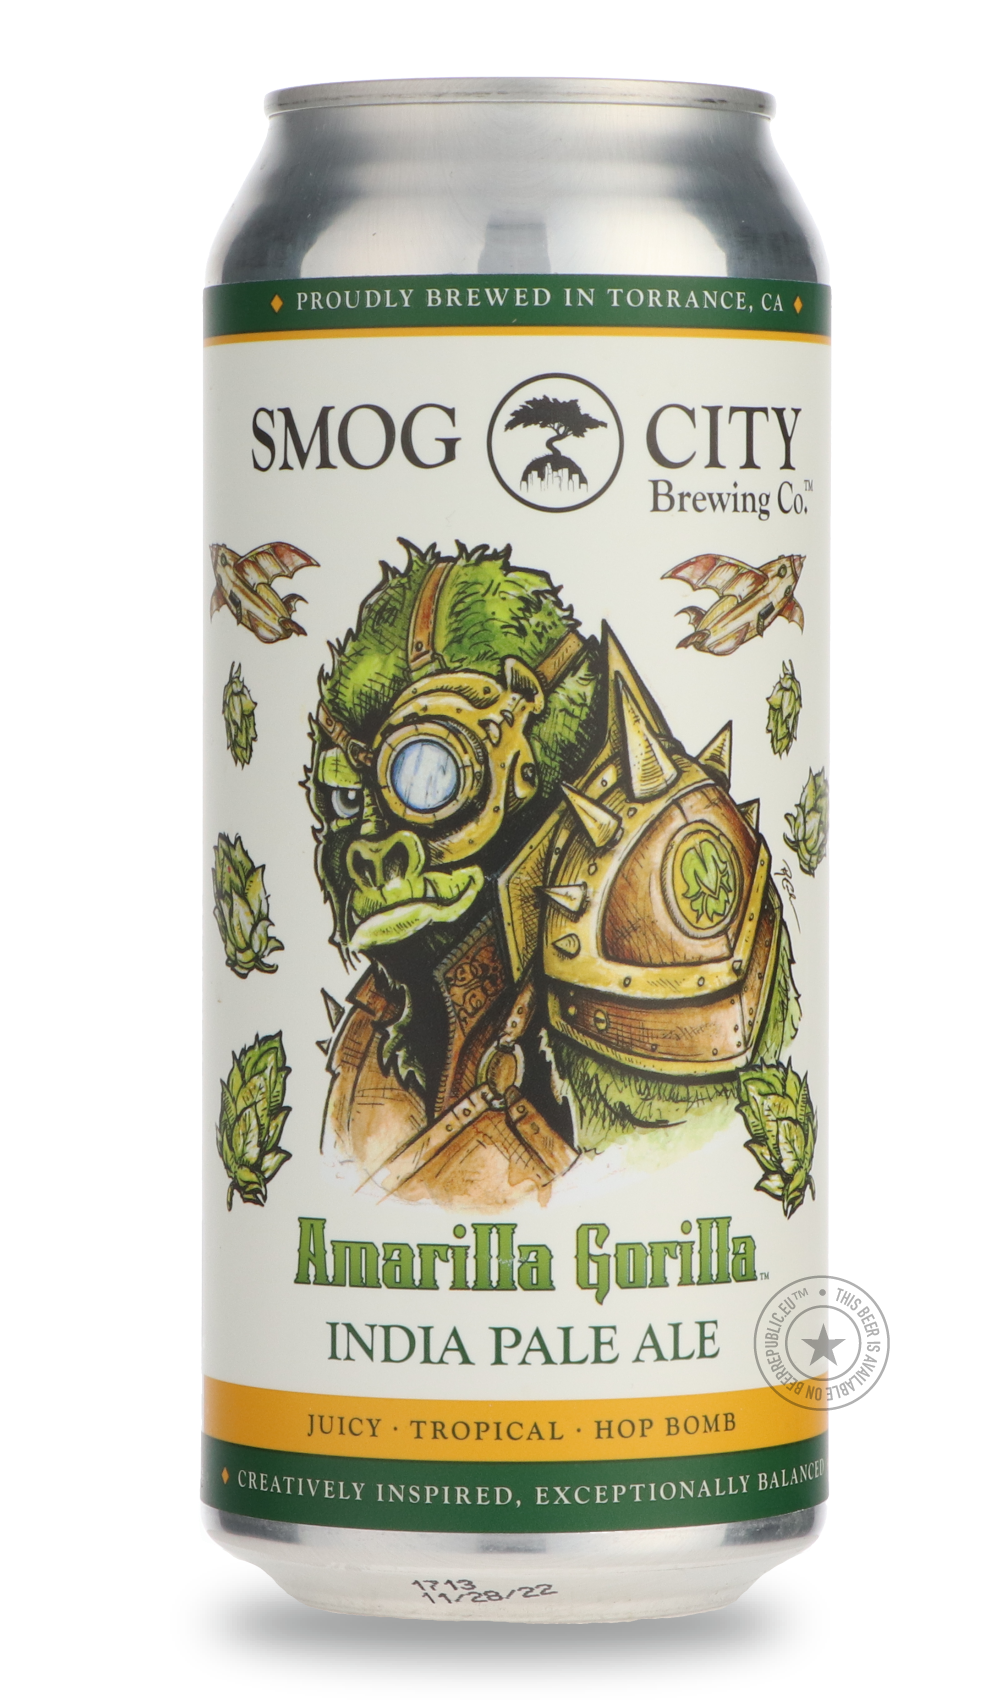 -Smog City- Amarilla Gorilla-IPA- Only @ Beer Republic - The best online beer store for American & Canadian craft beer - Buy beer online from the USA and Canada - Bier online kopen - Amerikaans bier kopen - Craft beer store - Craft beer kopen - Amerikanisch bier kaufen - Bier online kaufen - Acheter biere online - IPA - Stout - Porter - New England IPA - Hazy IPA - Imperial Stout - Barrel Aged - Barrel Aged Imperial Stout - Brown - Dark beer - Blond - Blonde - Pilsner - Lager - Wheat - Weizen - Amber - Barl